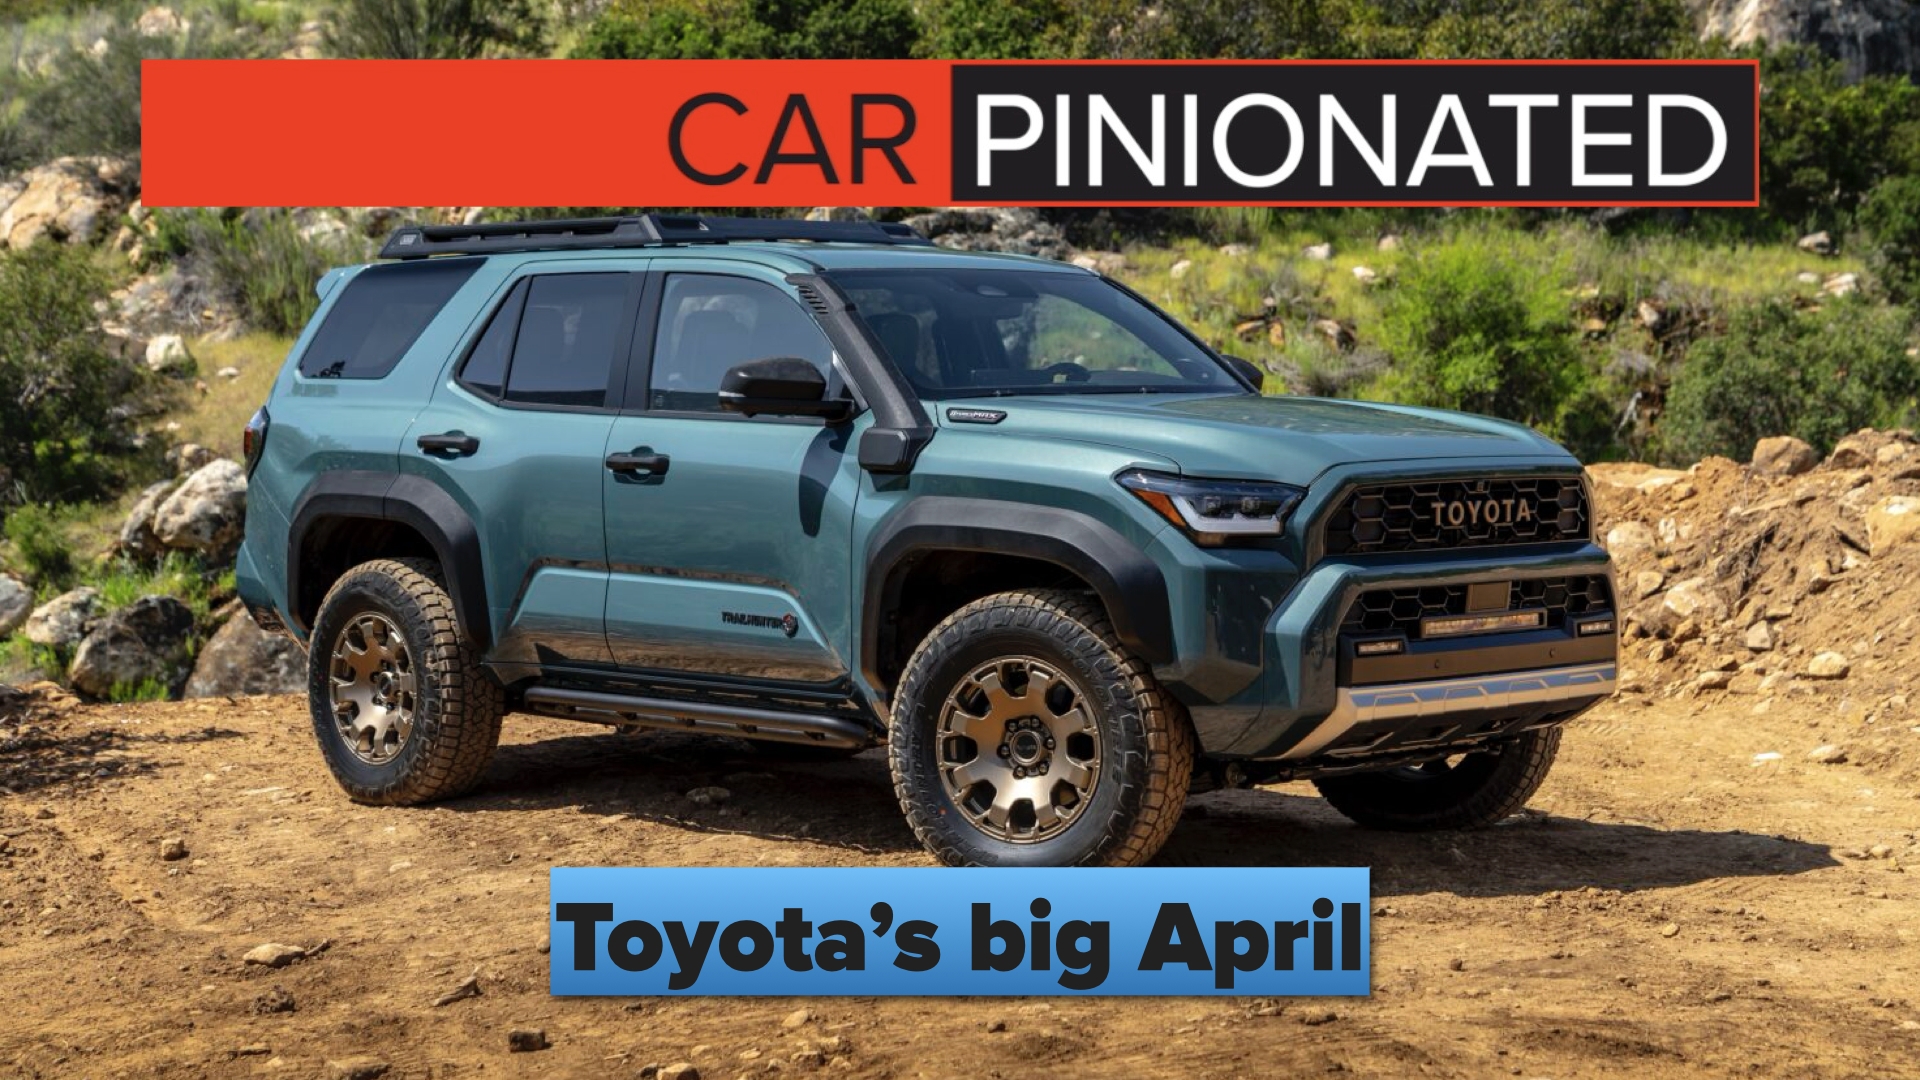 Lots of news coming out of Toyota last month